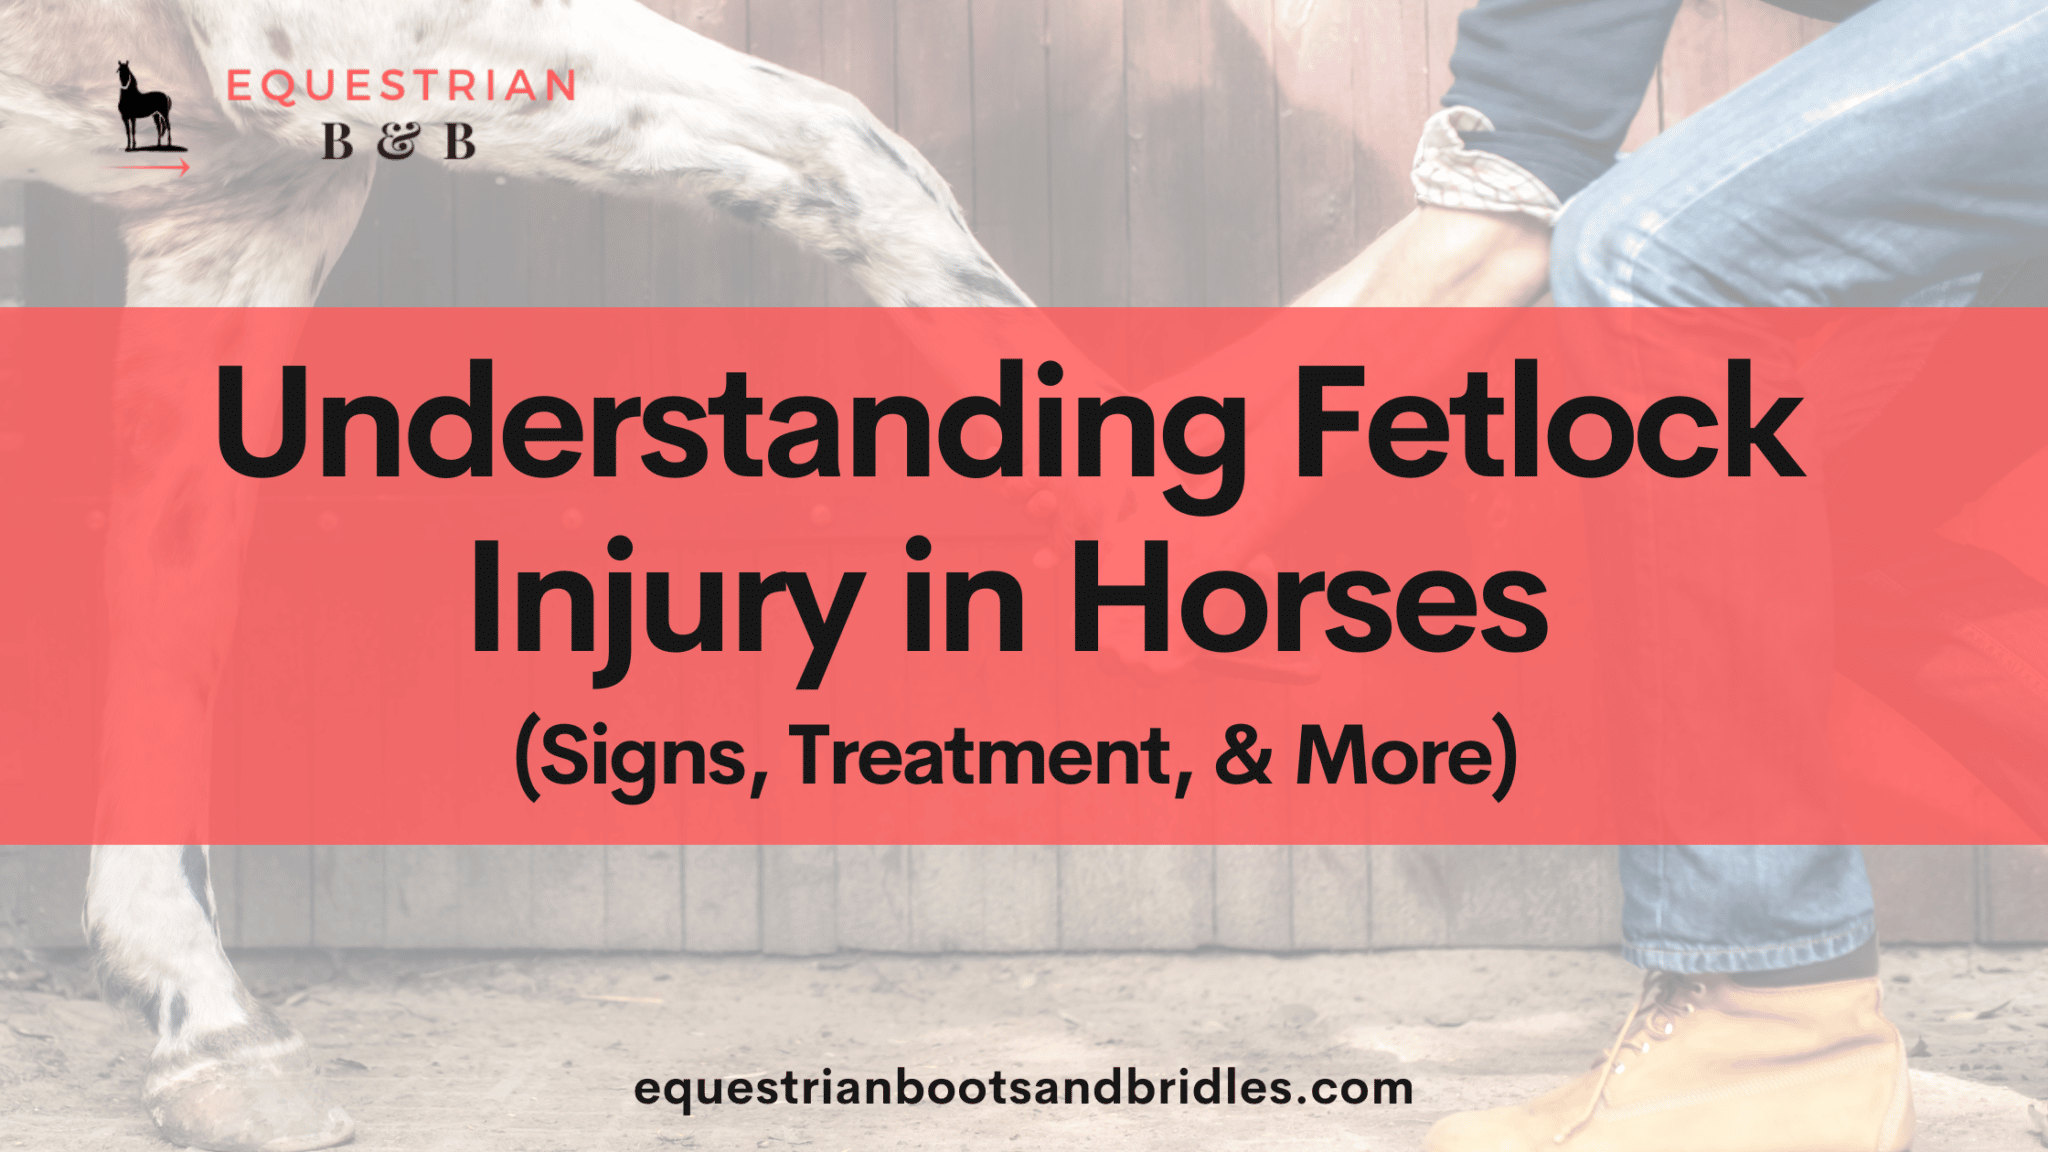 guide to fetlock injury in horses on equestrianbootsandbridles.com